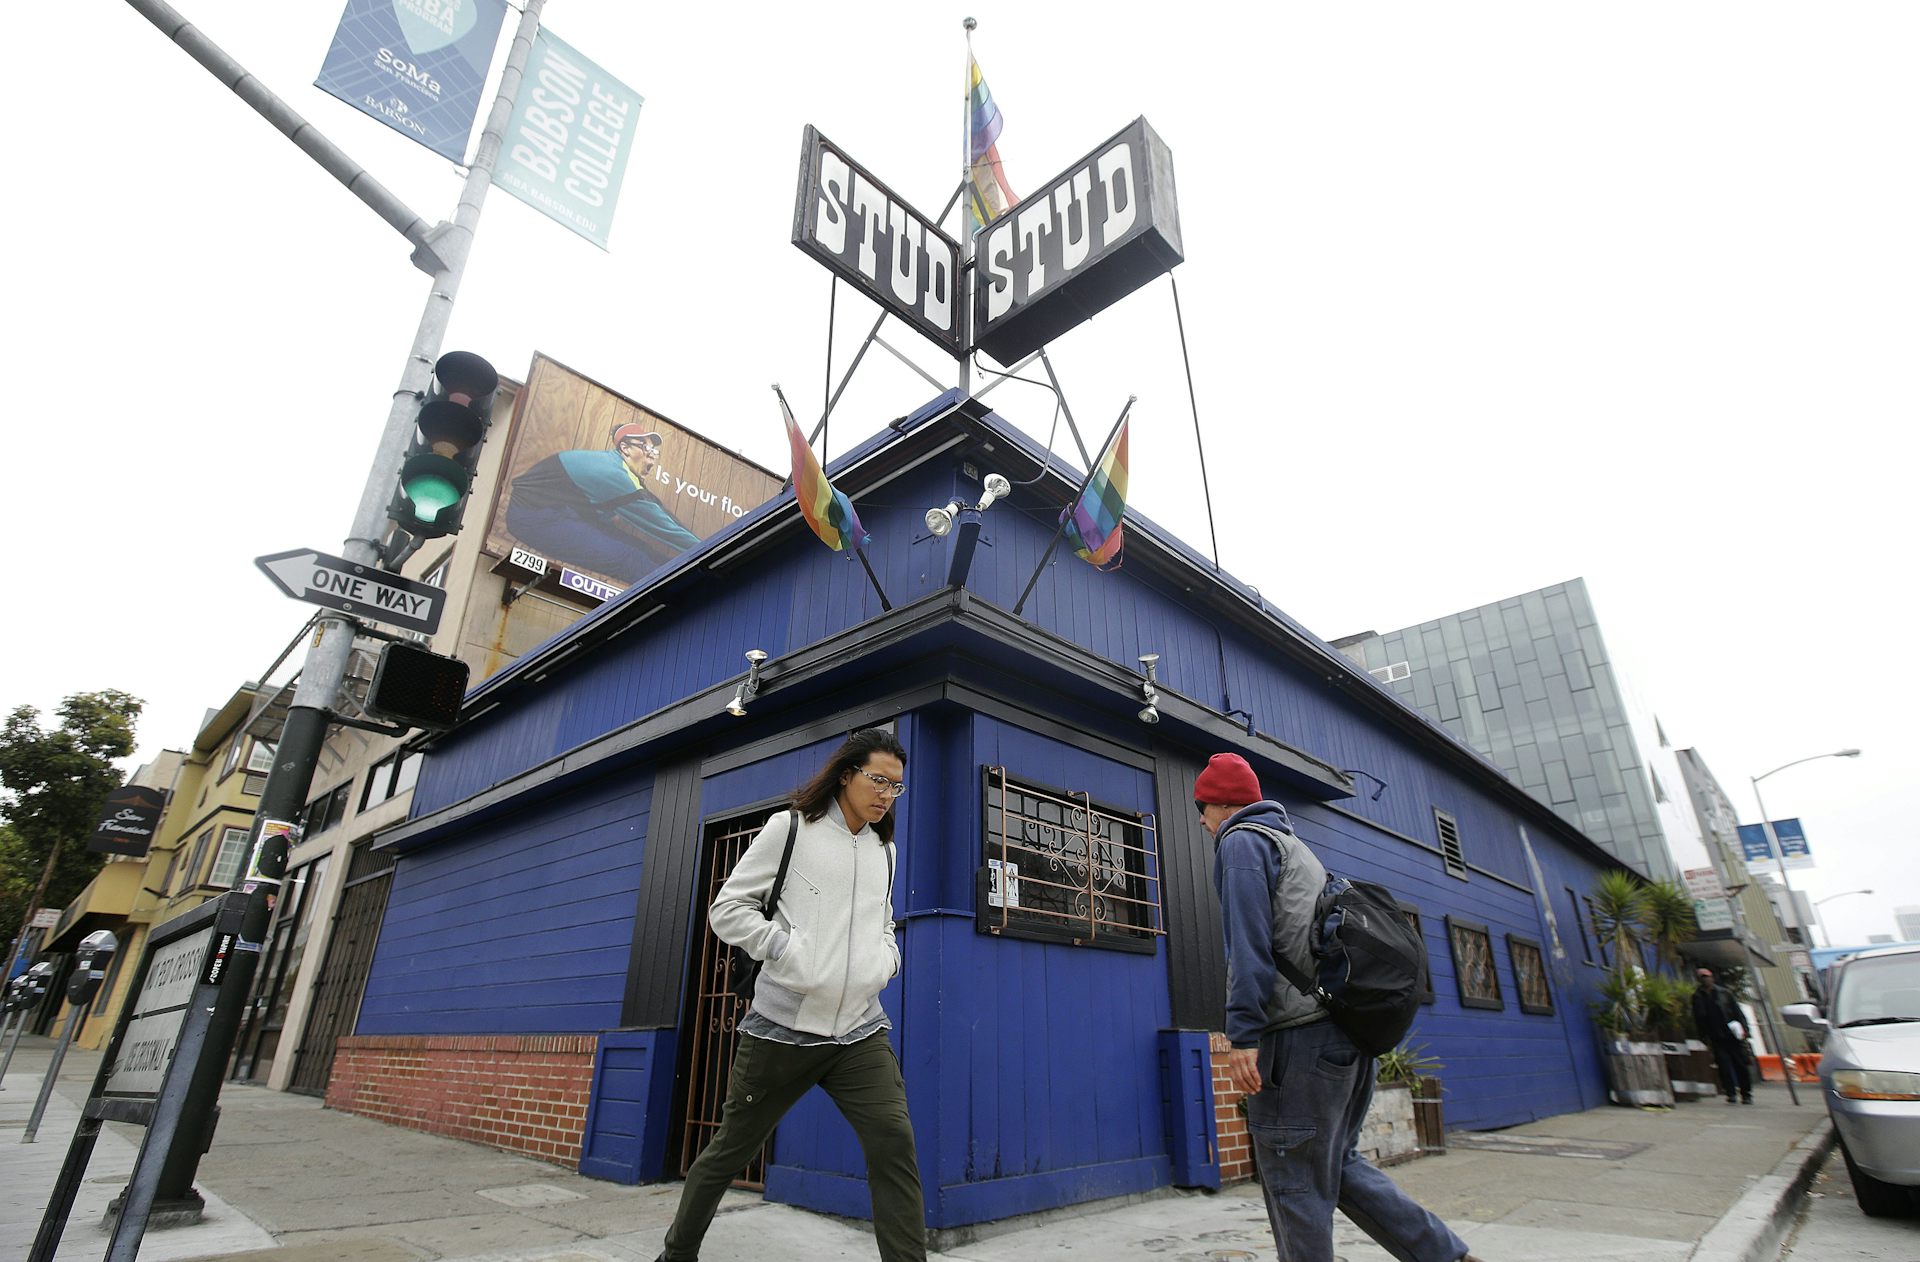 gay bars in chicago that have closed permanently